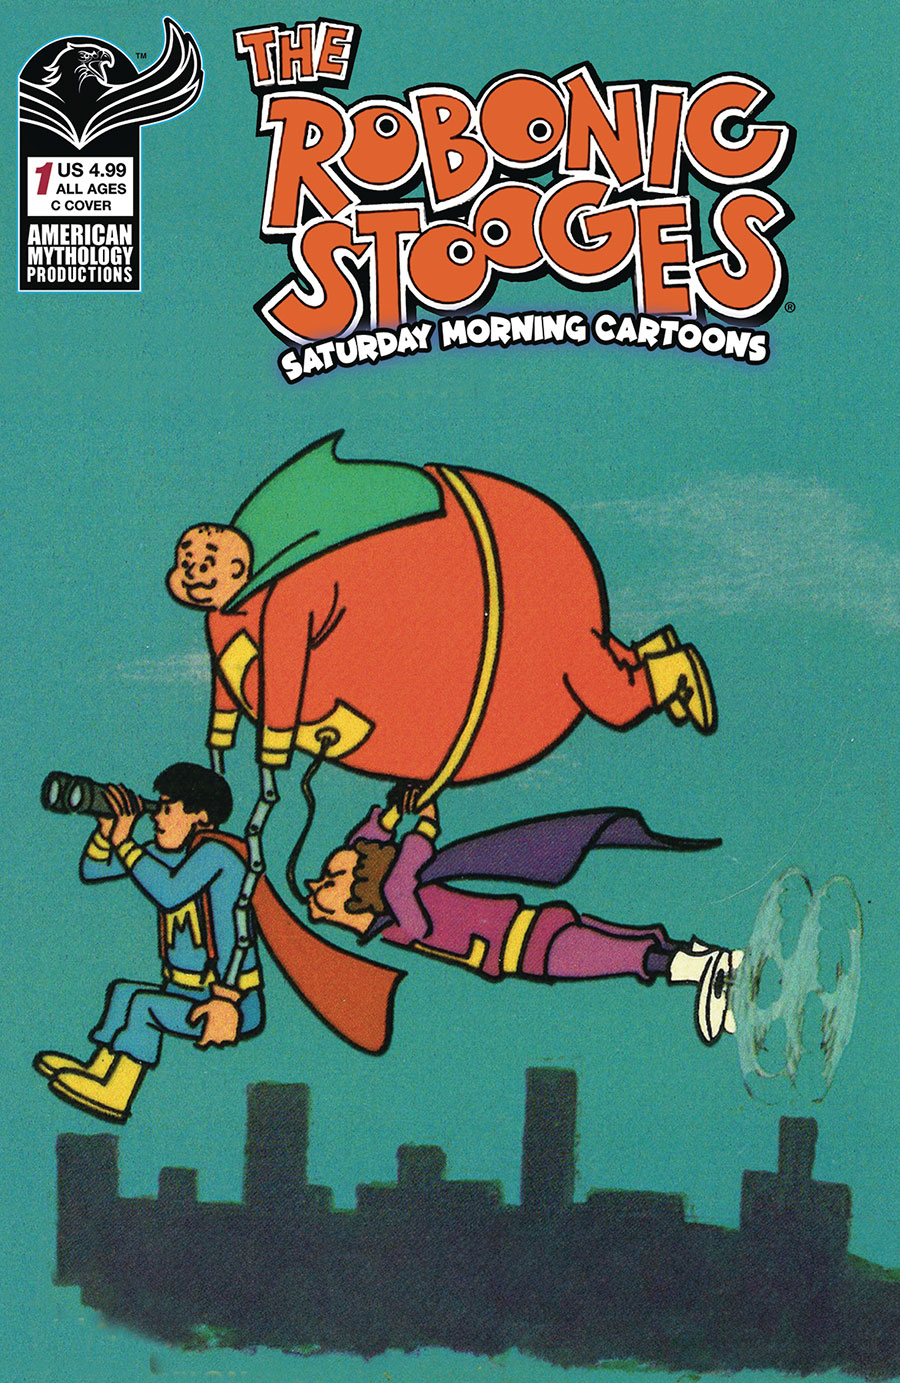 Robonic Stooges Saturday Morning Cartoons #1 (One Shot) Cover C Variant Cartoon Photo Cover